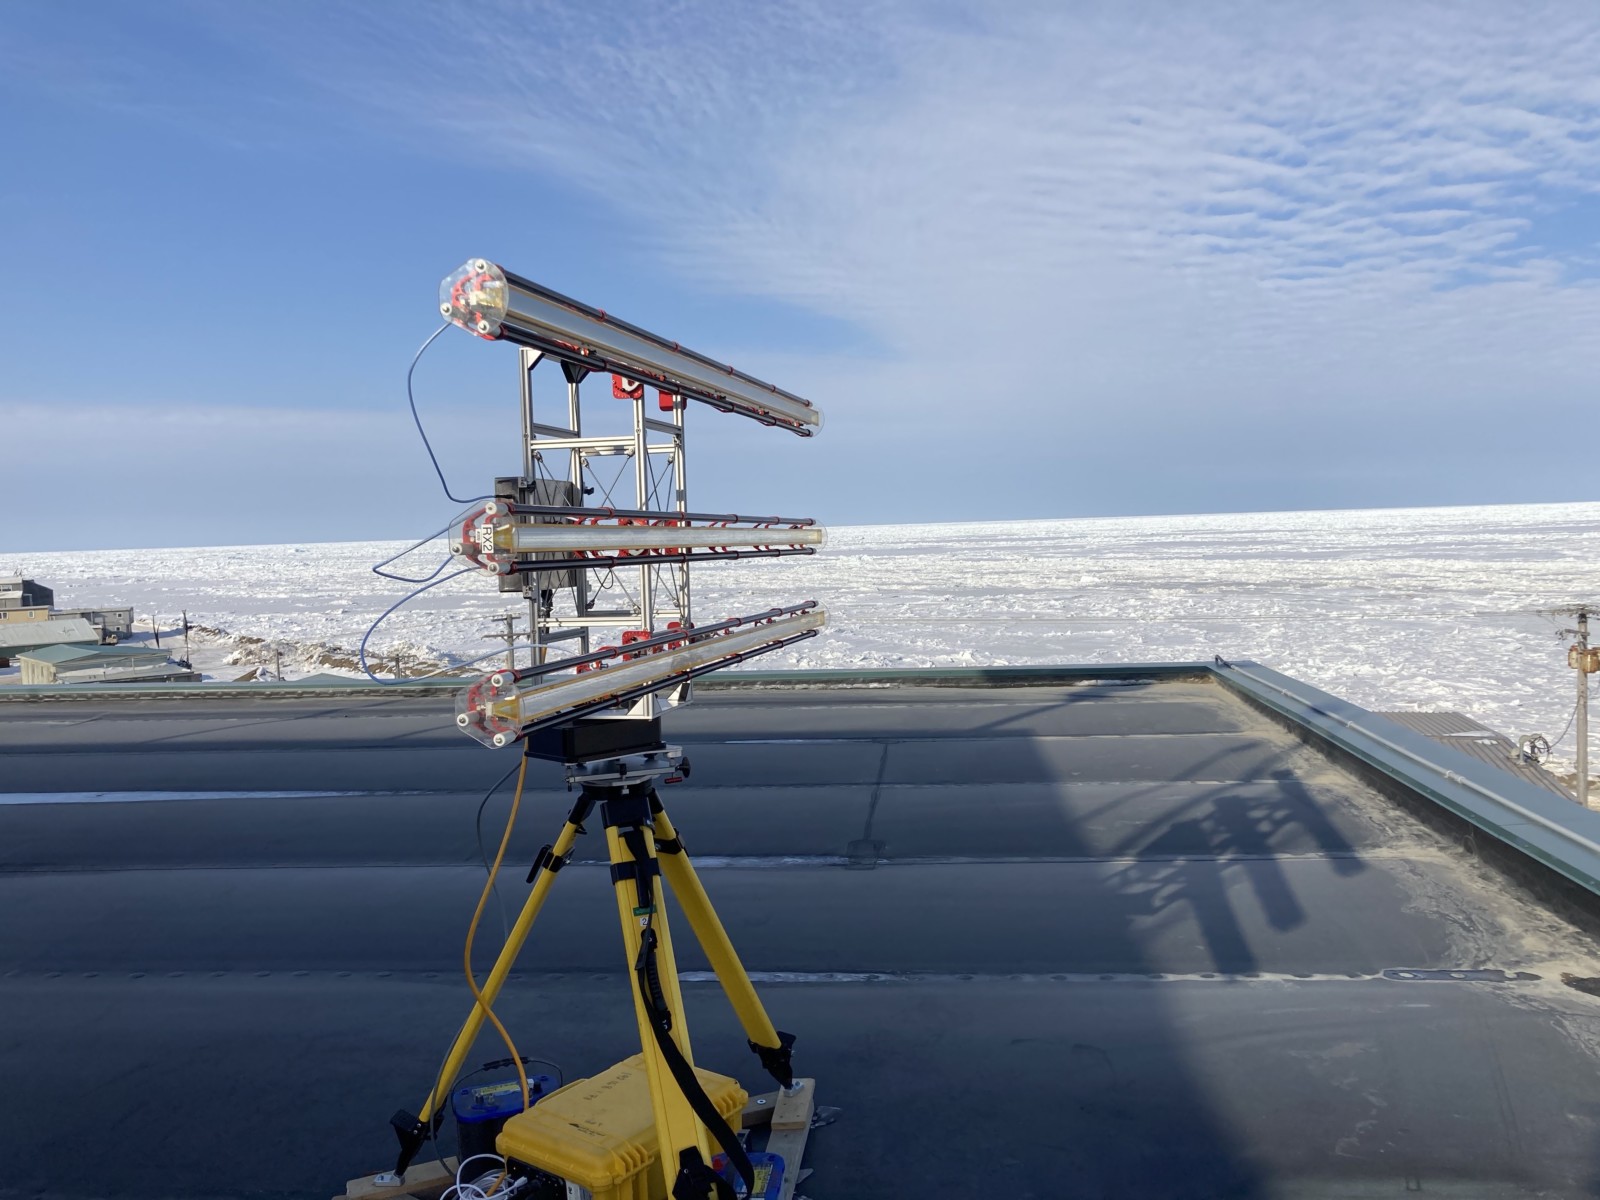 An instrument stands directed at the wide ice covered horizon with blue skies in the background.